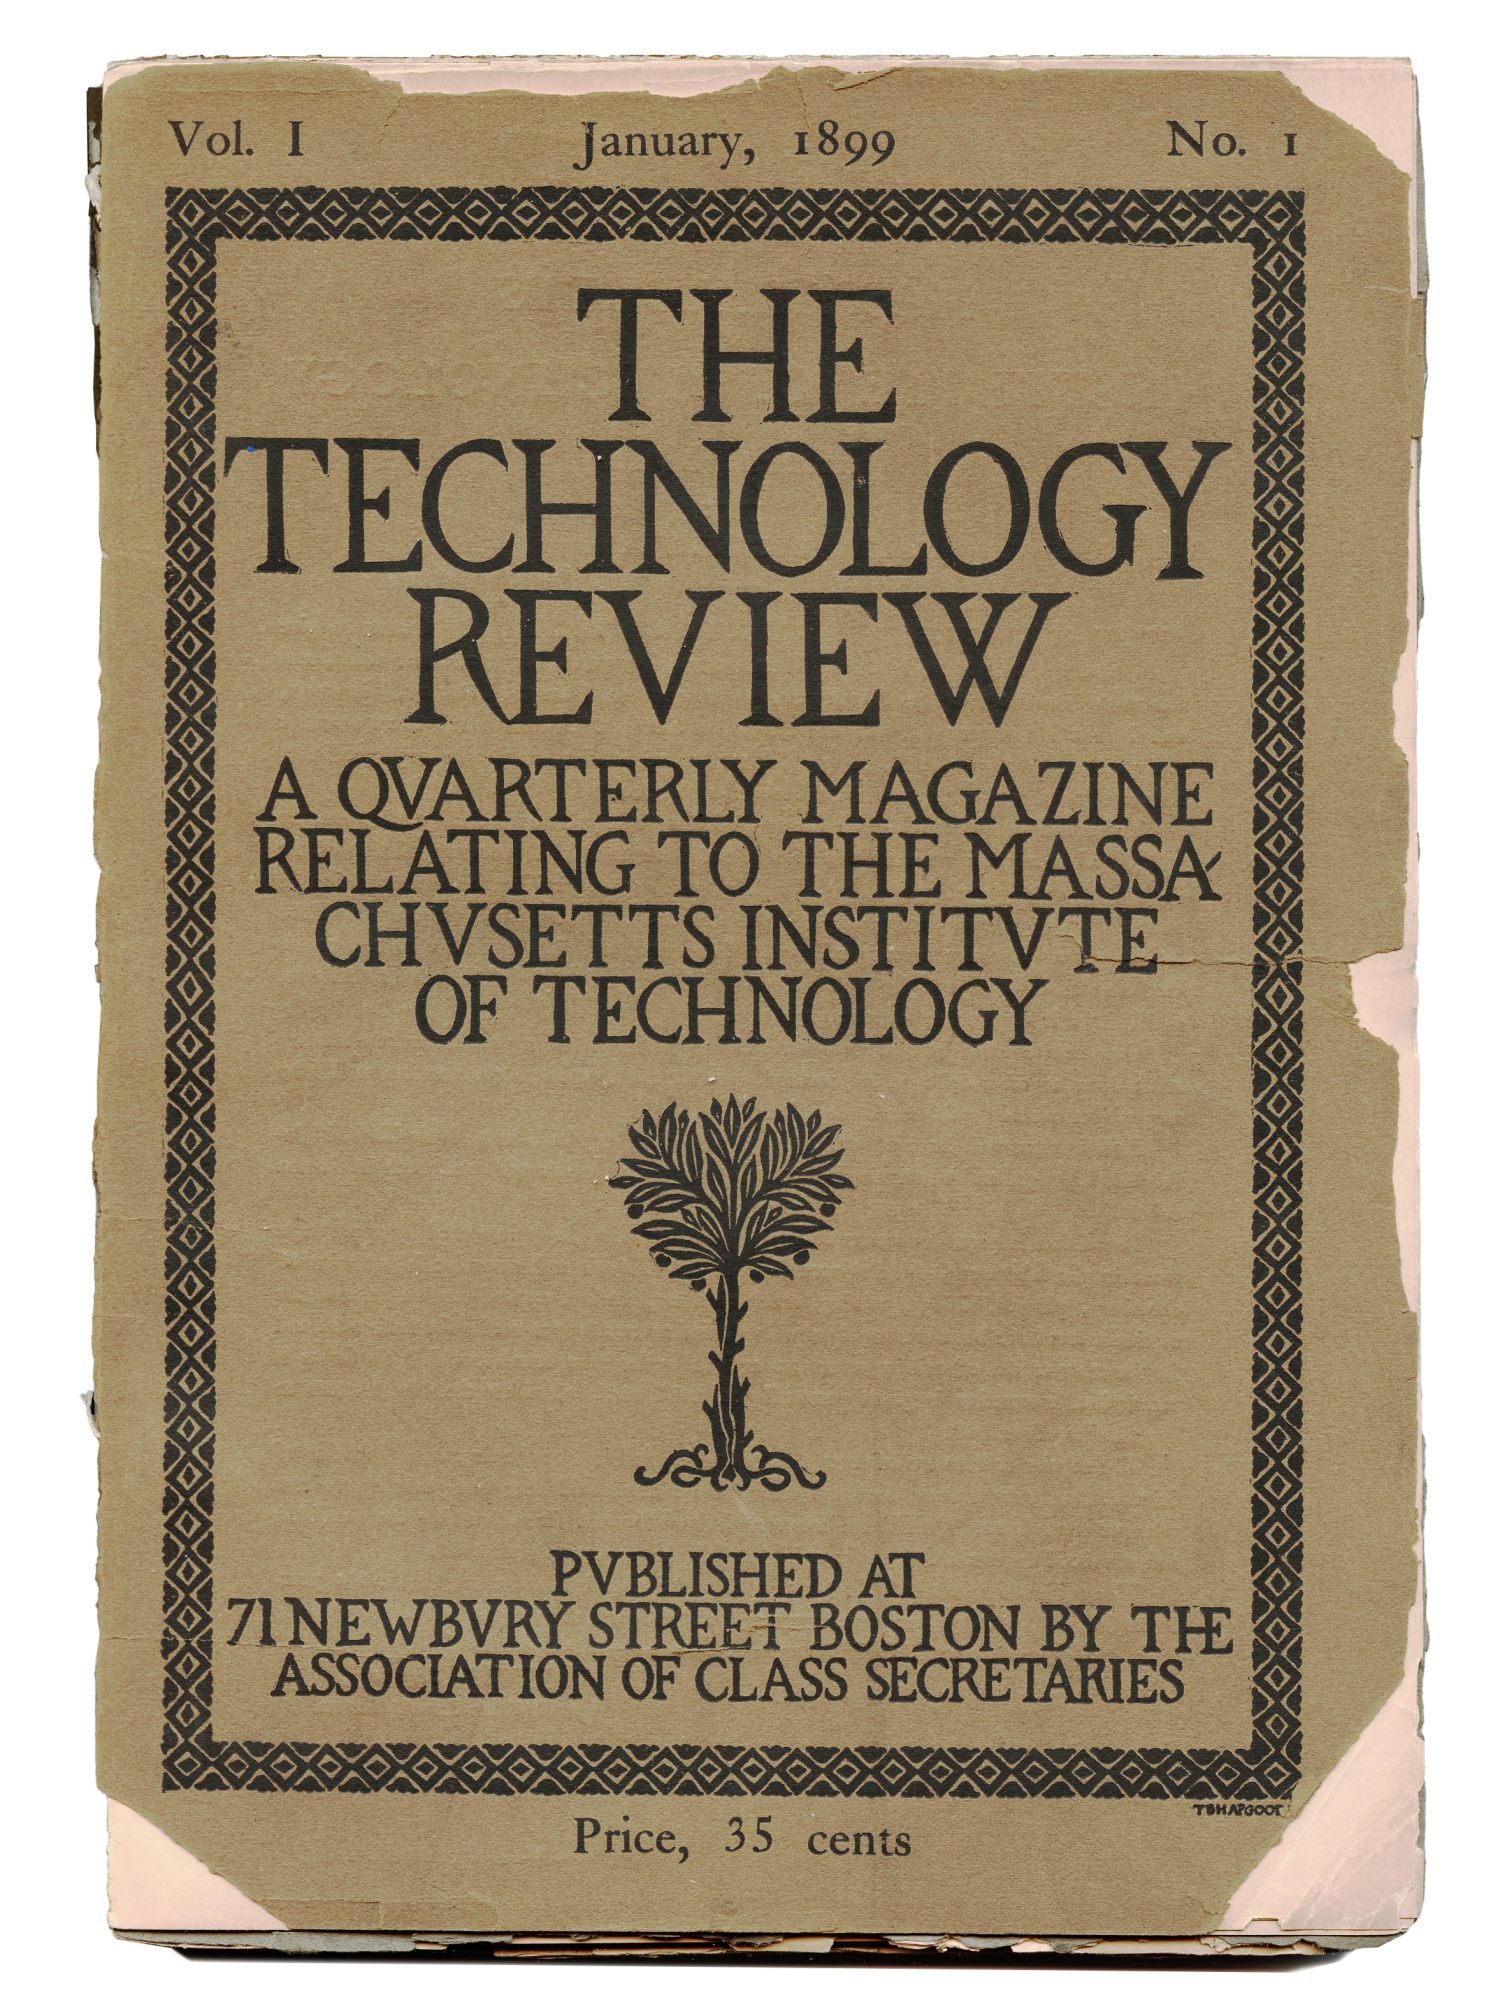 cover of the Vol 1, No. 1 January 1899 issue of The Technology Review